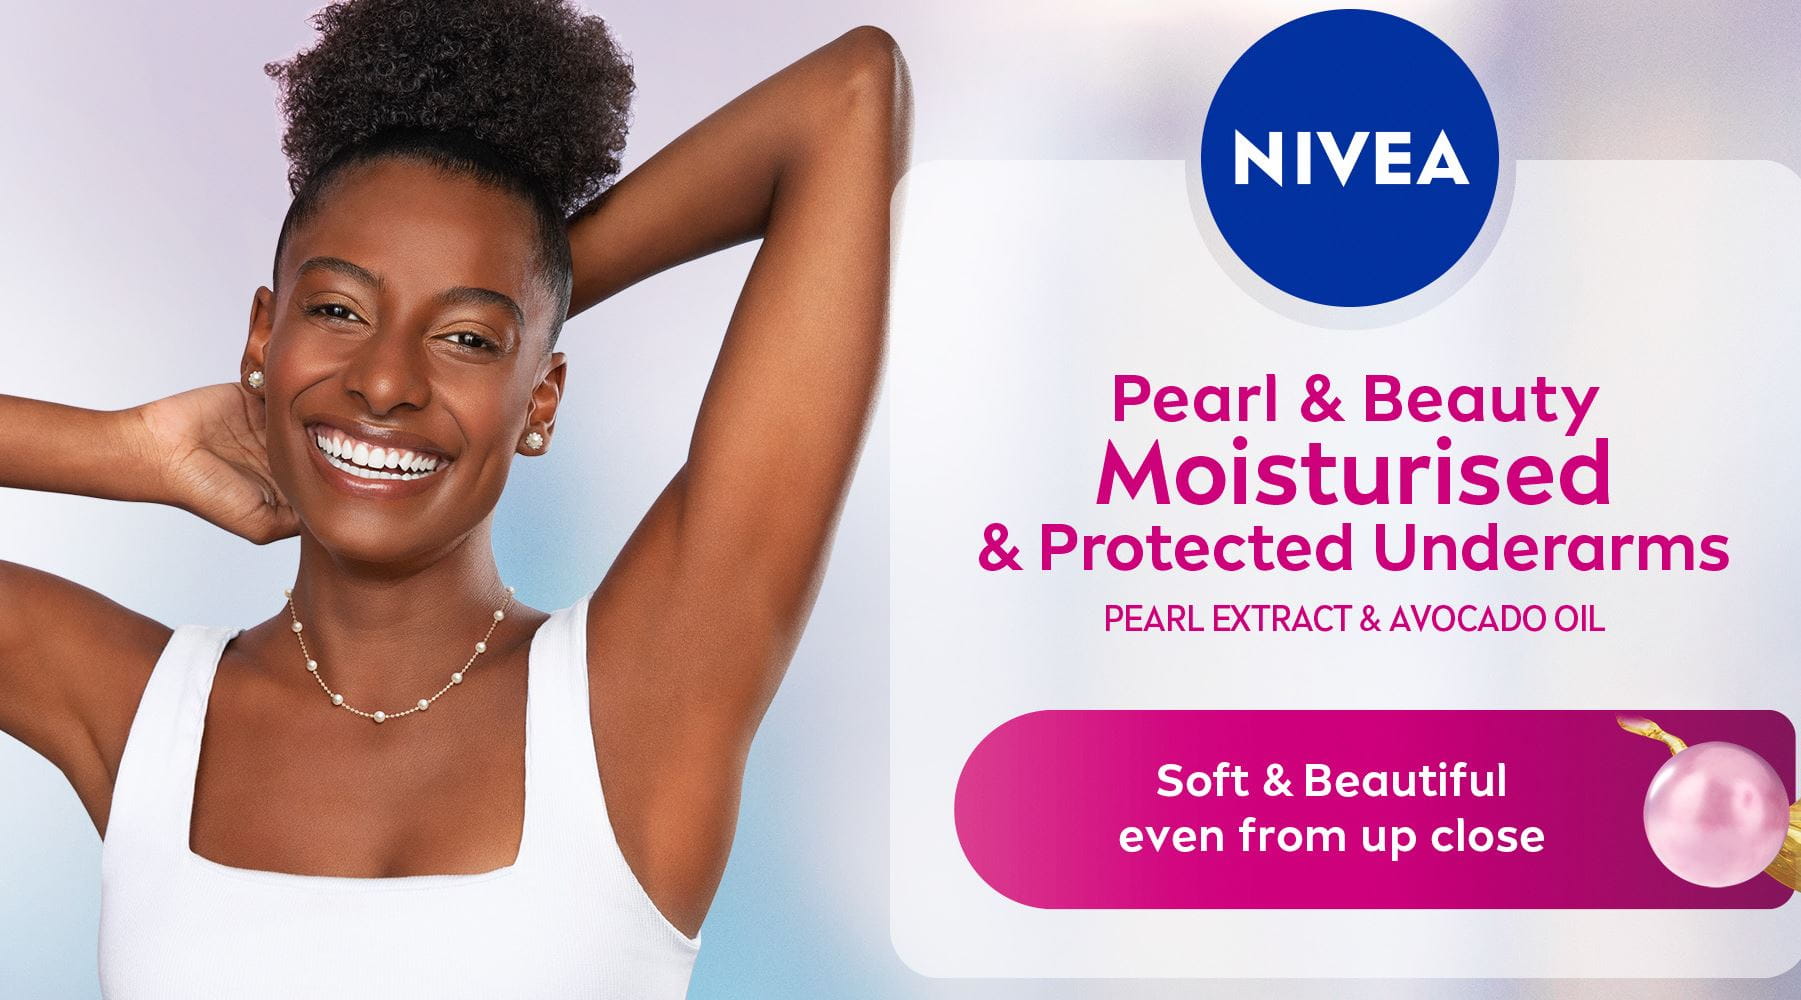 NIVEA Pearl & Beauty Deo with Pearl Extract and Avocado Oil